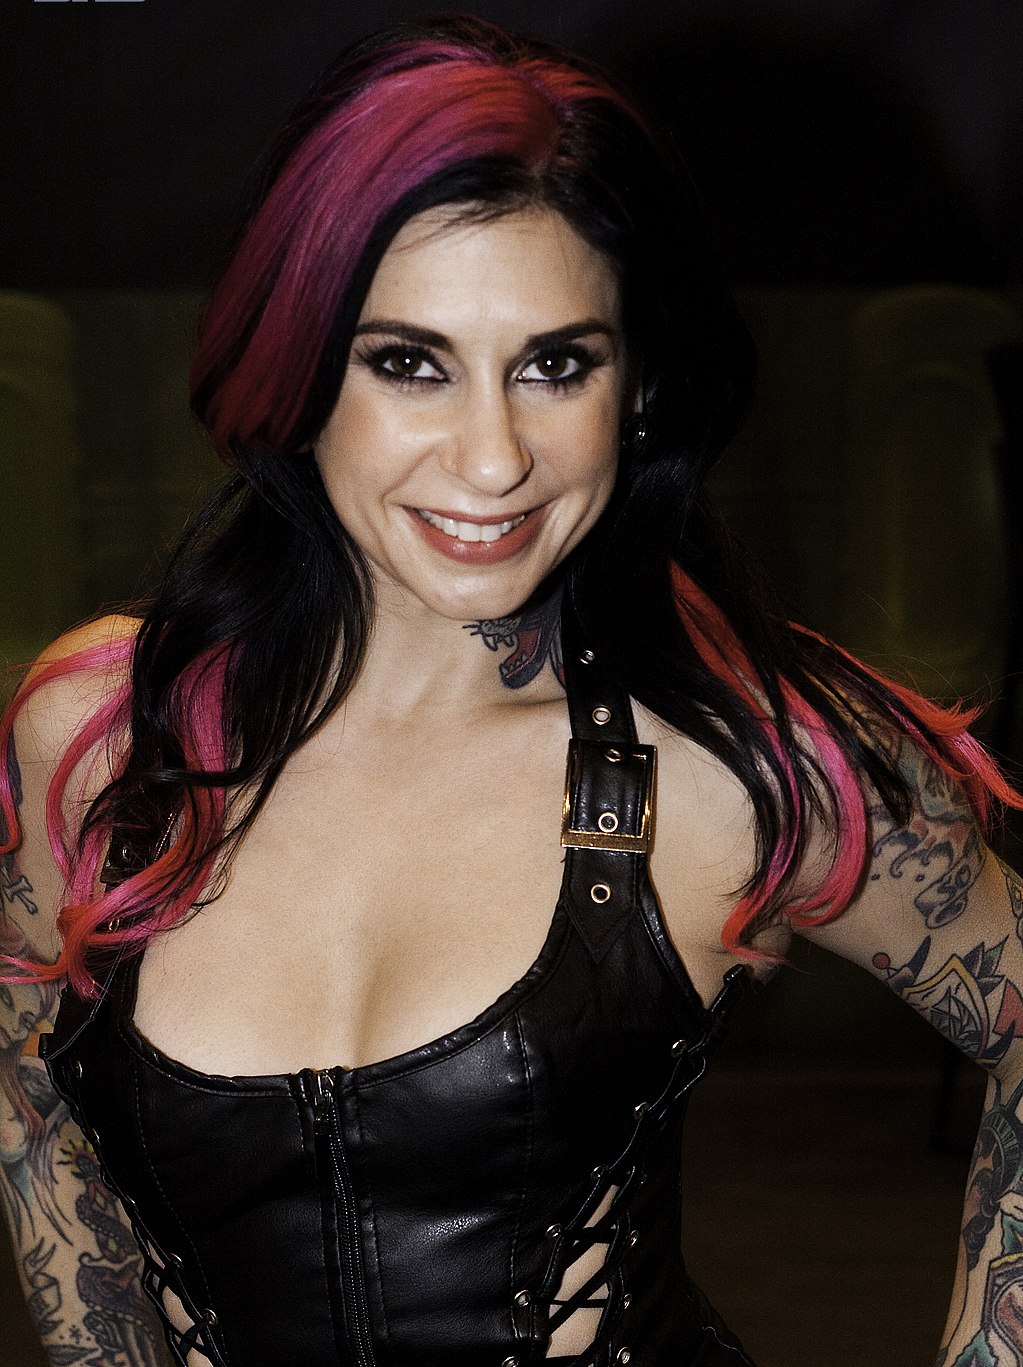 christina doss recommends joanna angel new boobs pic